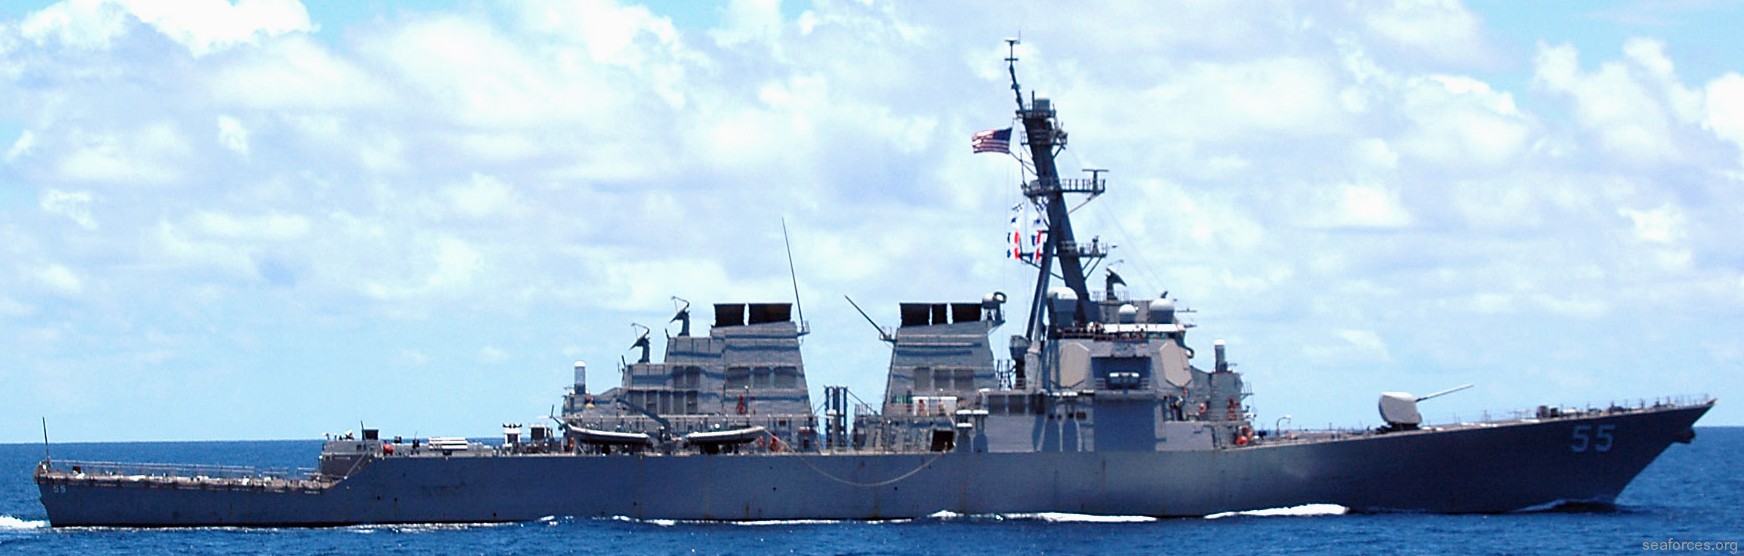 ddg-55 uss stout guided missile destroyer us navy 88 caribbean sea